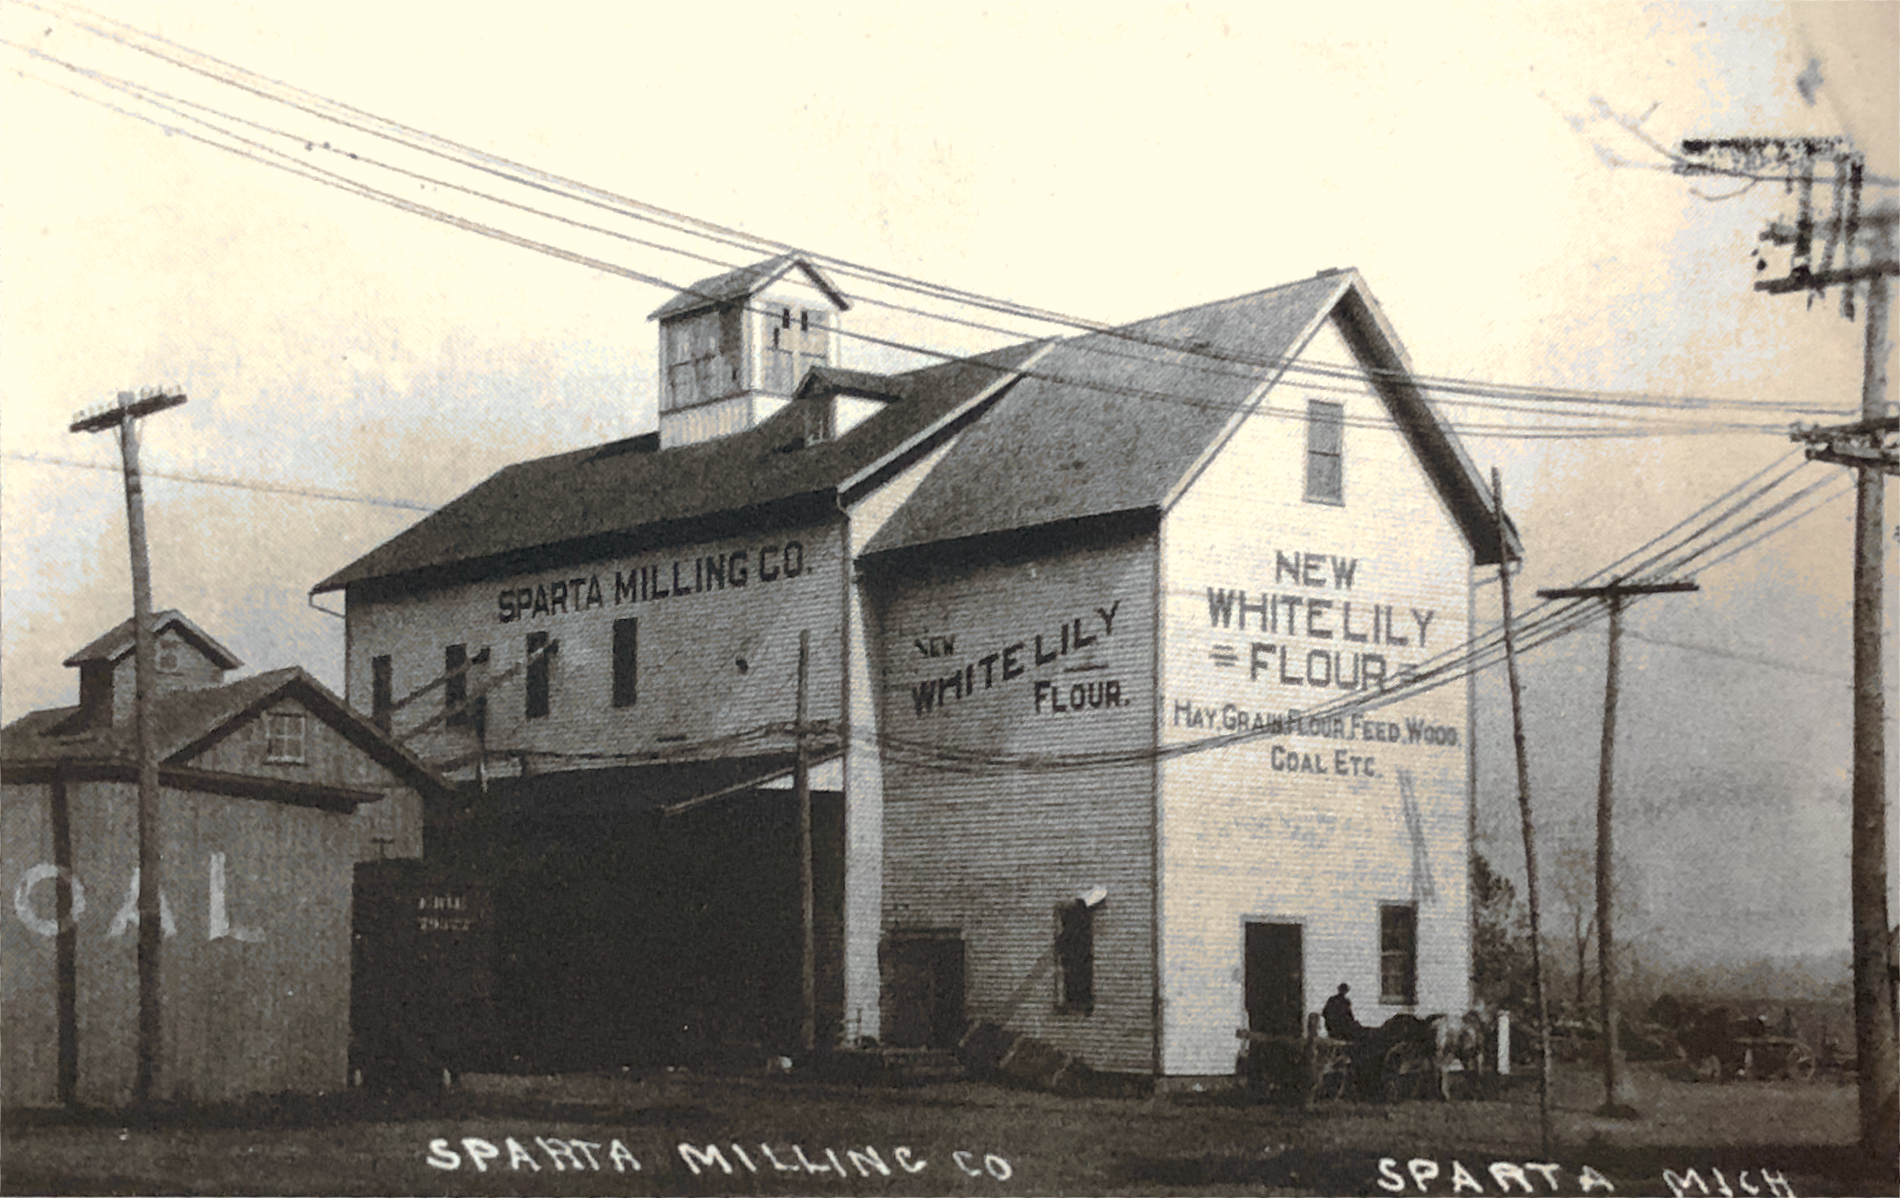 Sparta Milling Co